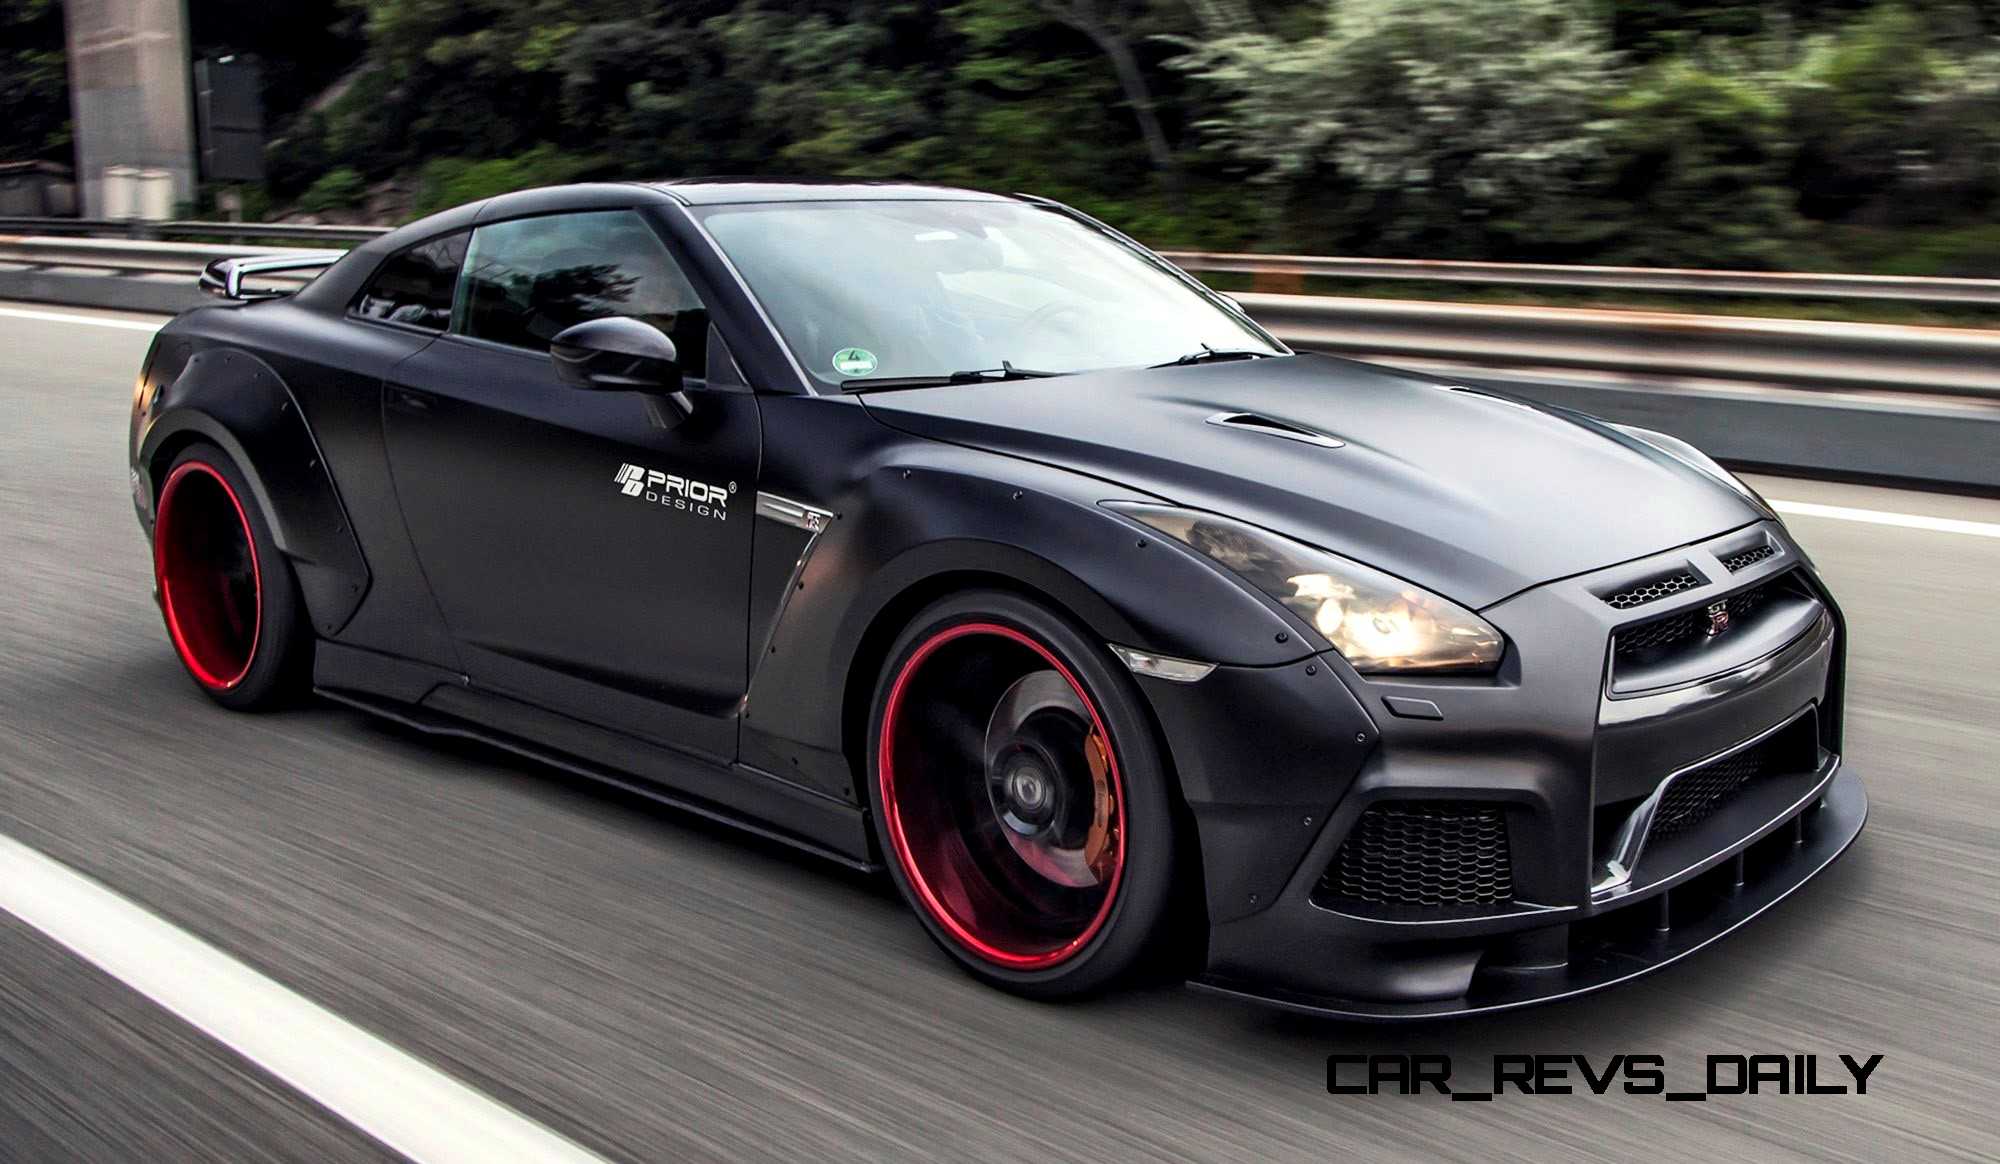 Prior Design Pd750 Widebody Nissan Gt R 9 Images, Photos, Reviews